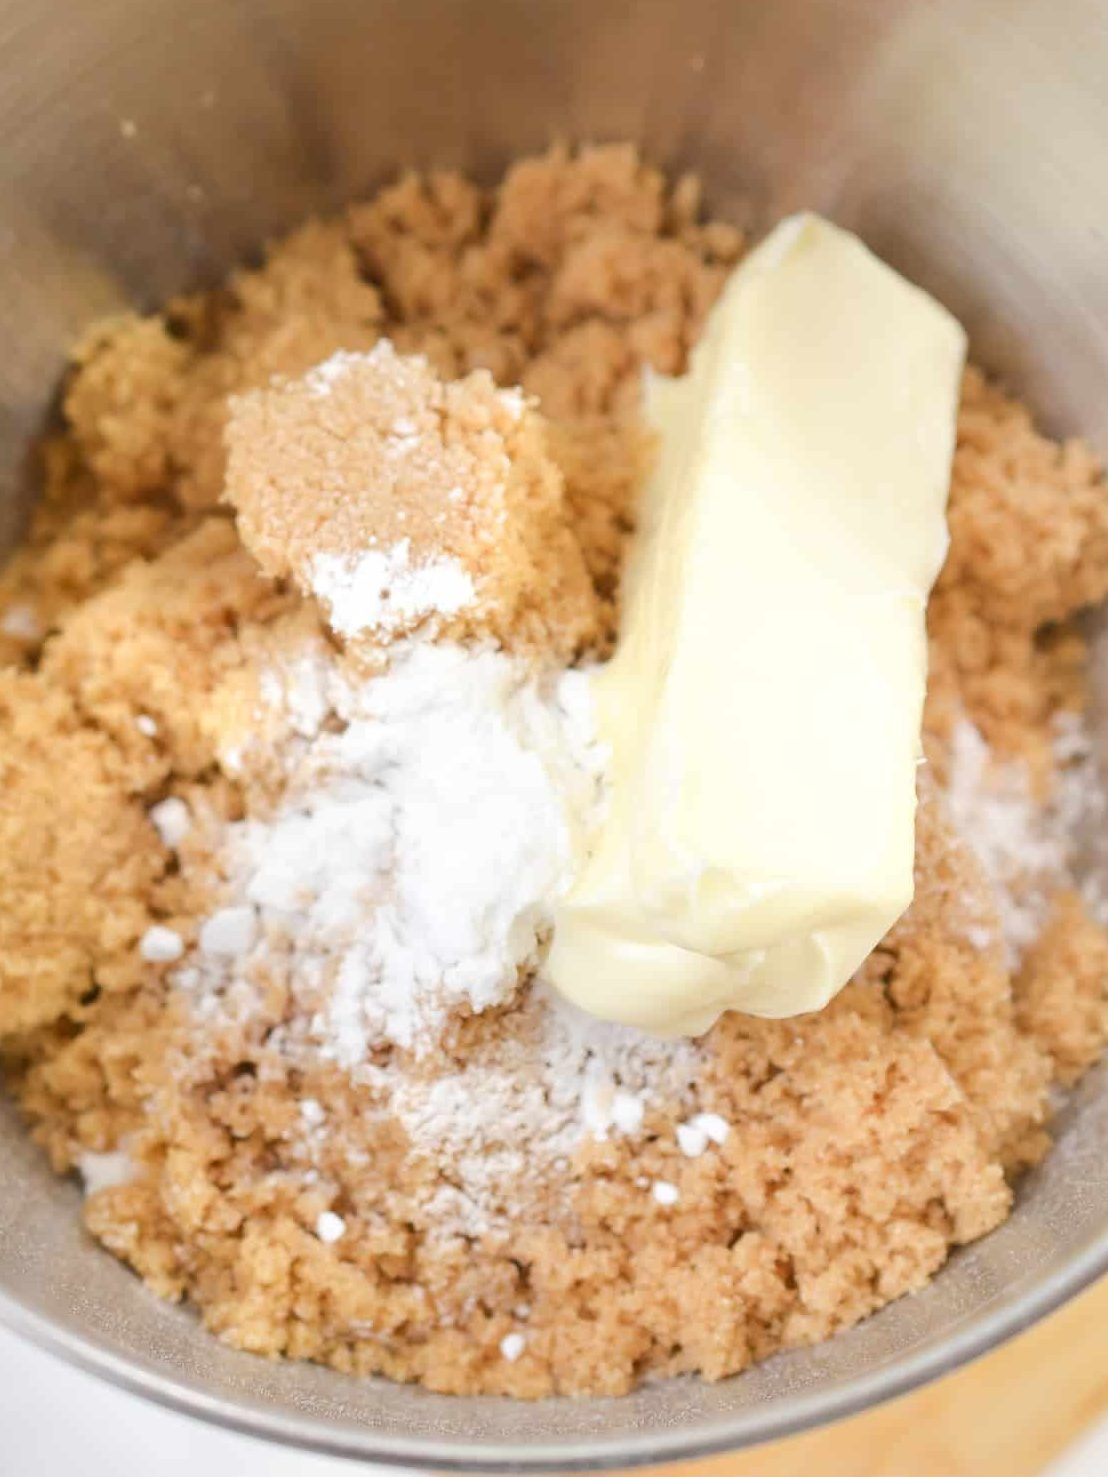 Then, add ½ cup of butter softened and ½ tsp of baking soda.